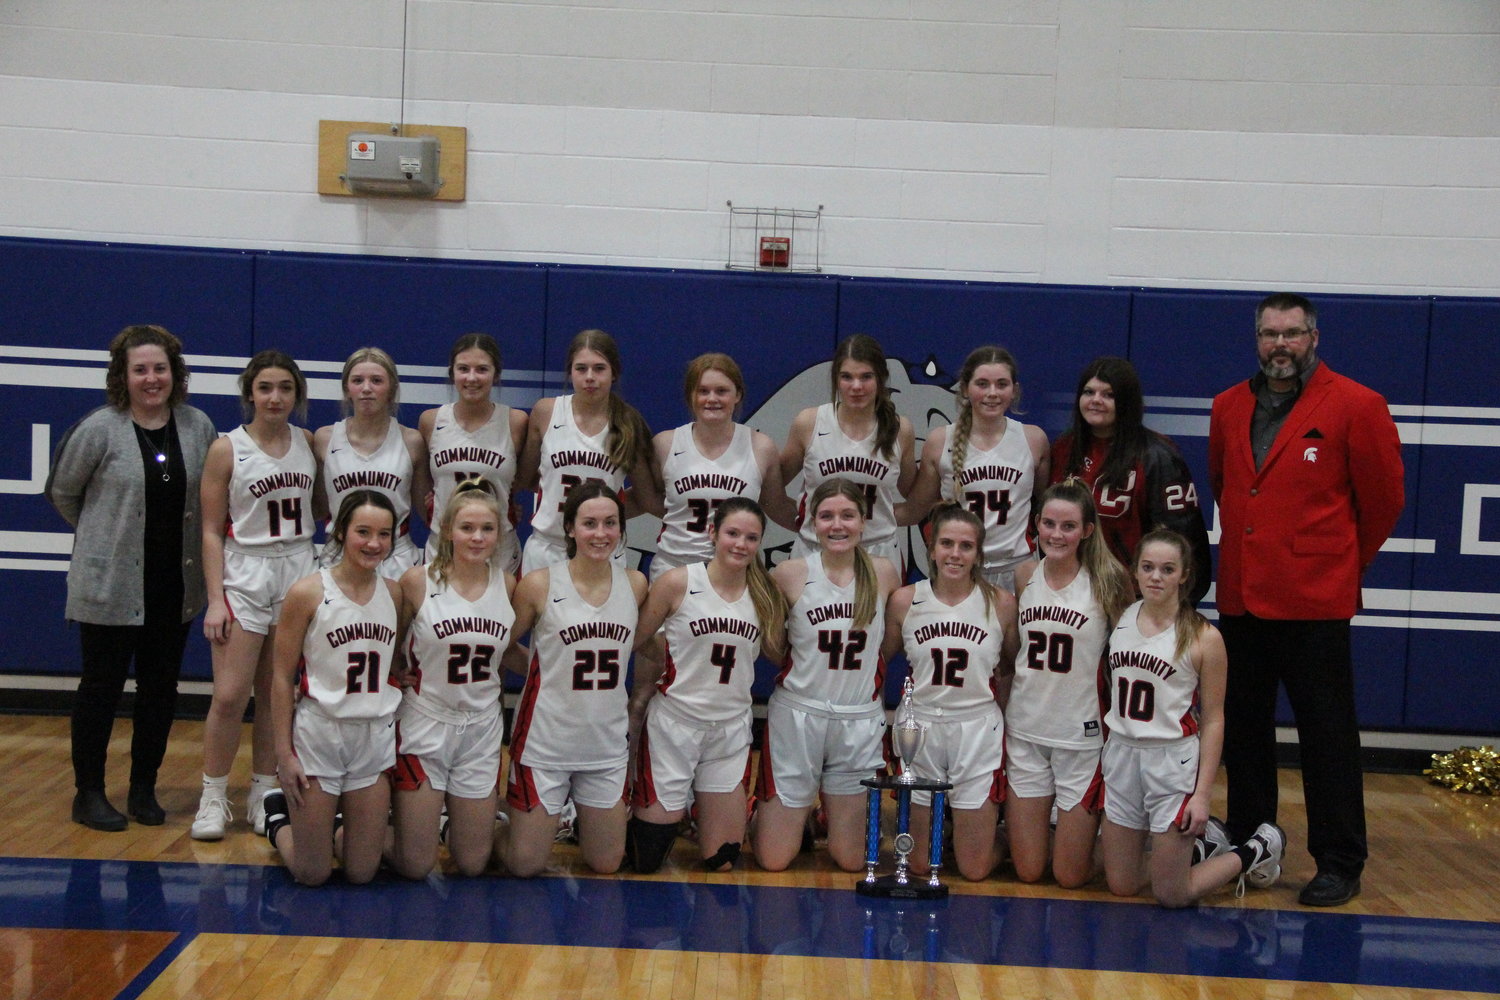 The second-place Community R-6 girls includes back from left, coach Stacie Carroz, Adrianna Woodson, Peyton Beamer, Rylee Rafferty, Kat Meyer, Amy McCurdy, Jocelyn Curtis, Aaliyah Welch, manager Paige Painter, and head coach Bob Curtis. The front row from left, includes, Peyton Schafer, Chloe Johnson, Brooklynn Glasgow, Kayla Jett, Olivia Kuda, Sarah Angel, Kylie Brooks and Alyssa Beamer.